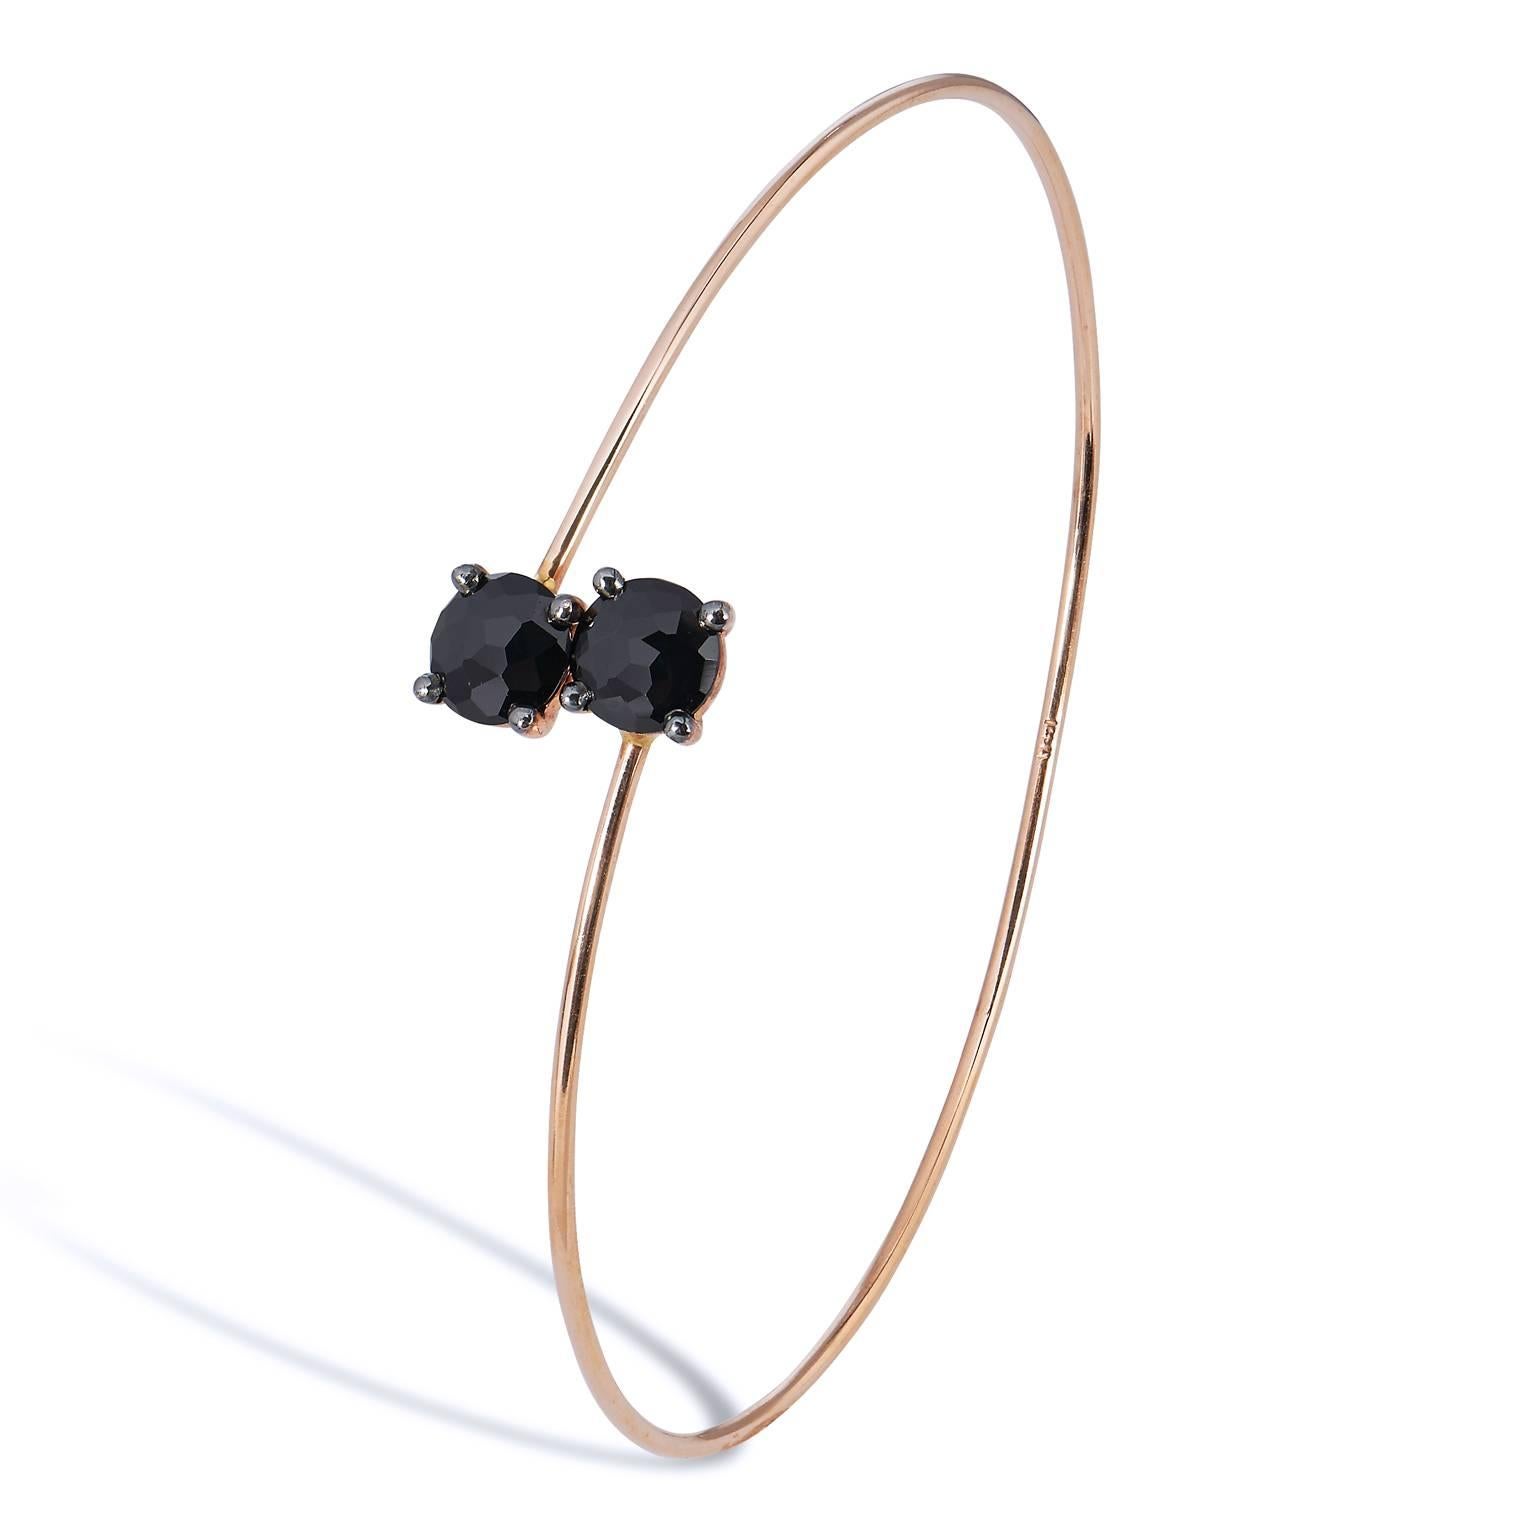 Suzanne Kalan Black Spinel 14 Karat Rose Gold Wrap Around Bracelet

This beautiful 14 karat rose gold wrap around bracelet is so easy to wear.  
It has two 6 mm round cut black spinels in a prong setting. 
This sleek and sophisticated bracelet is by